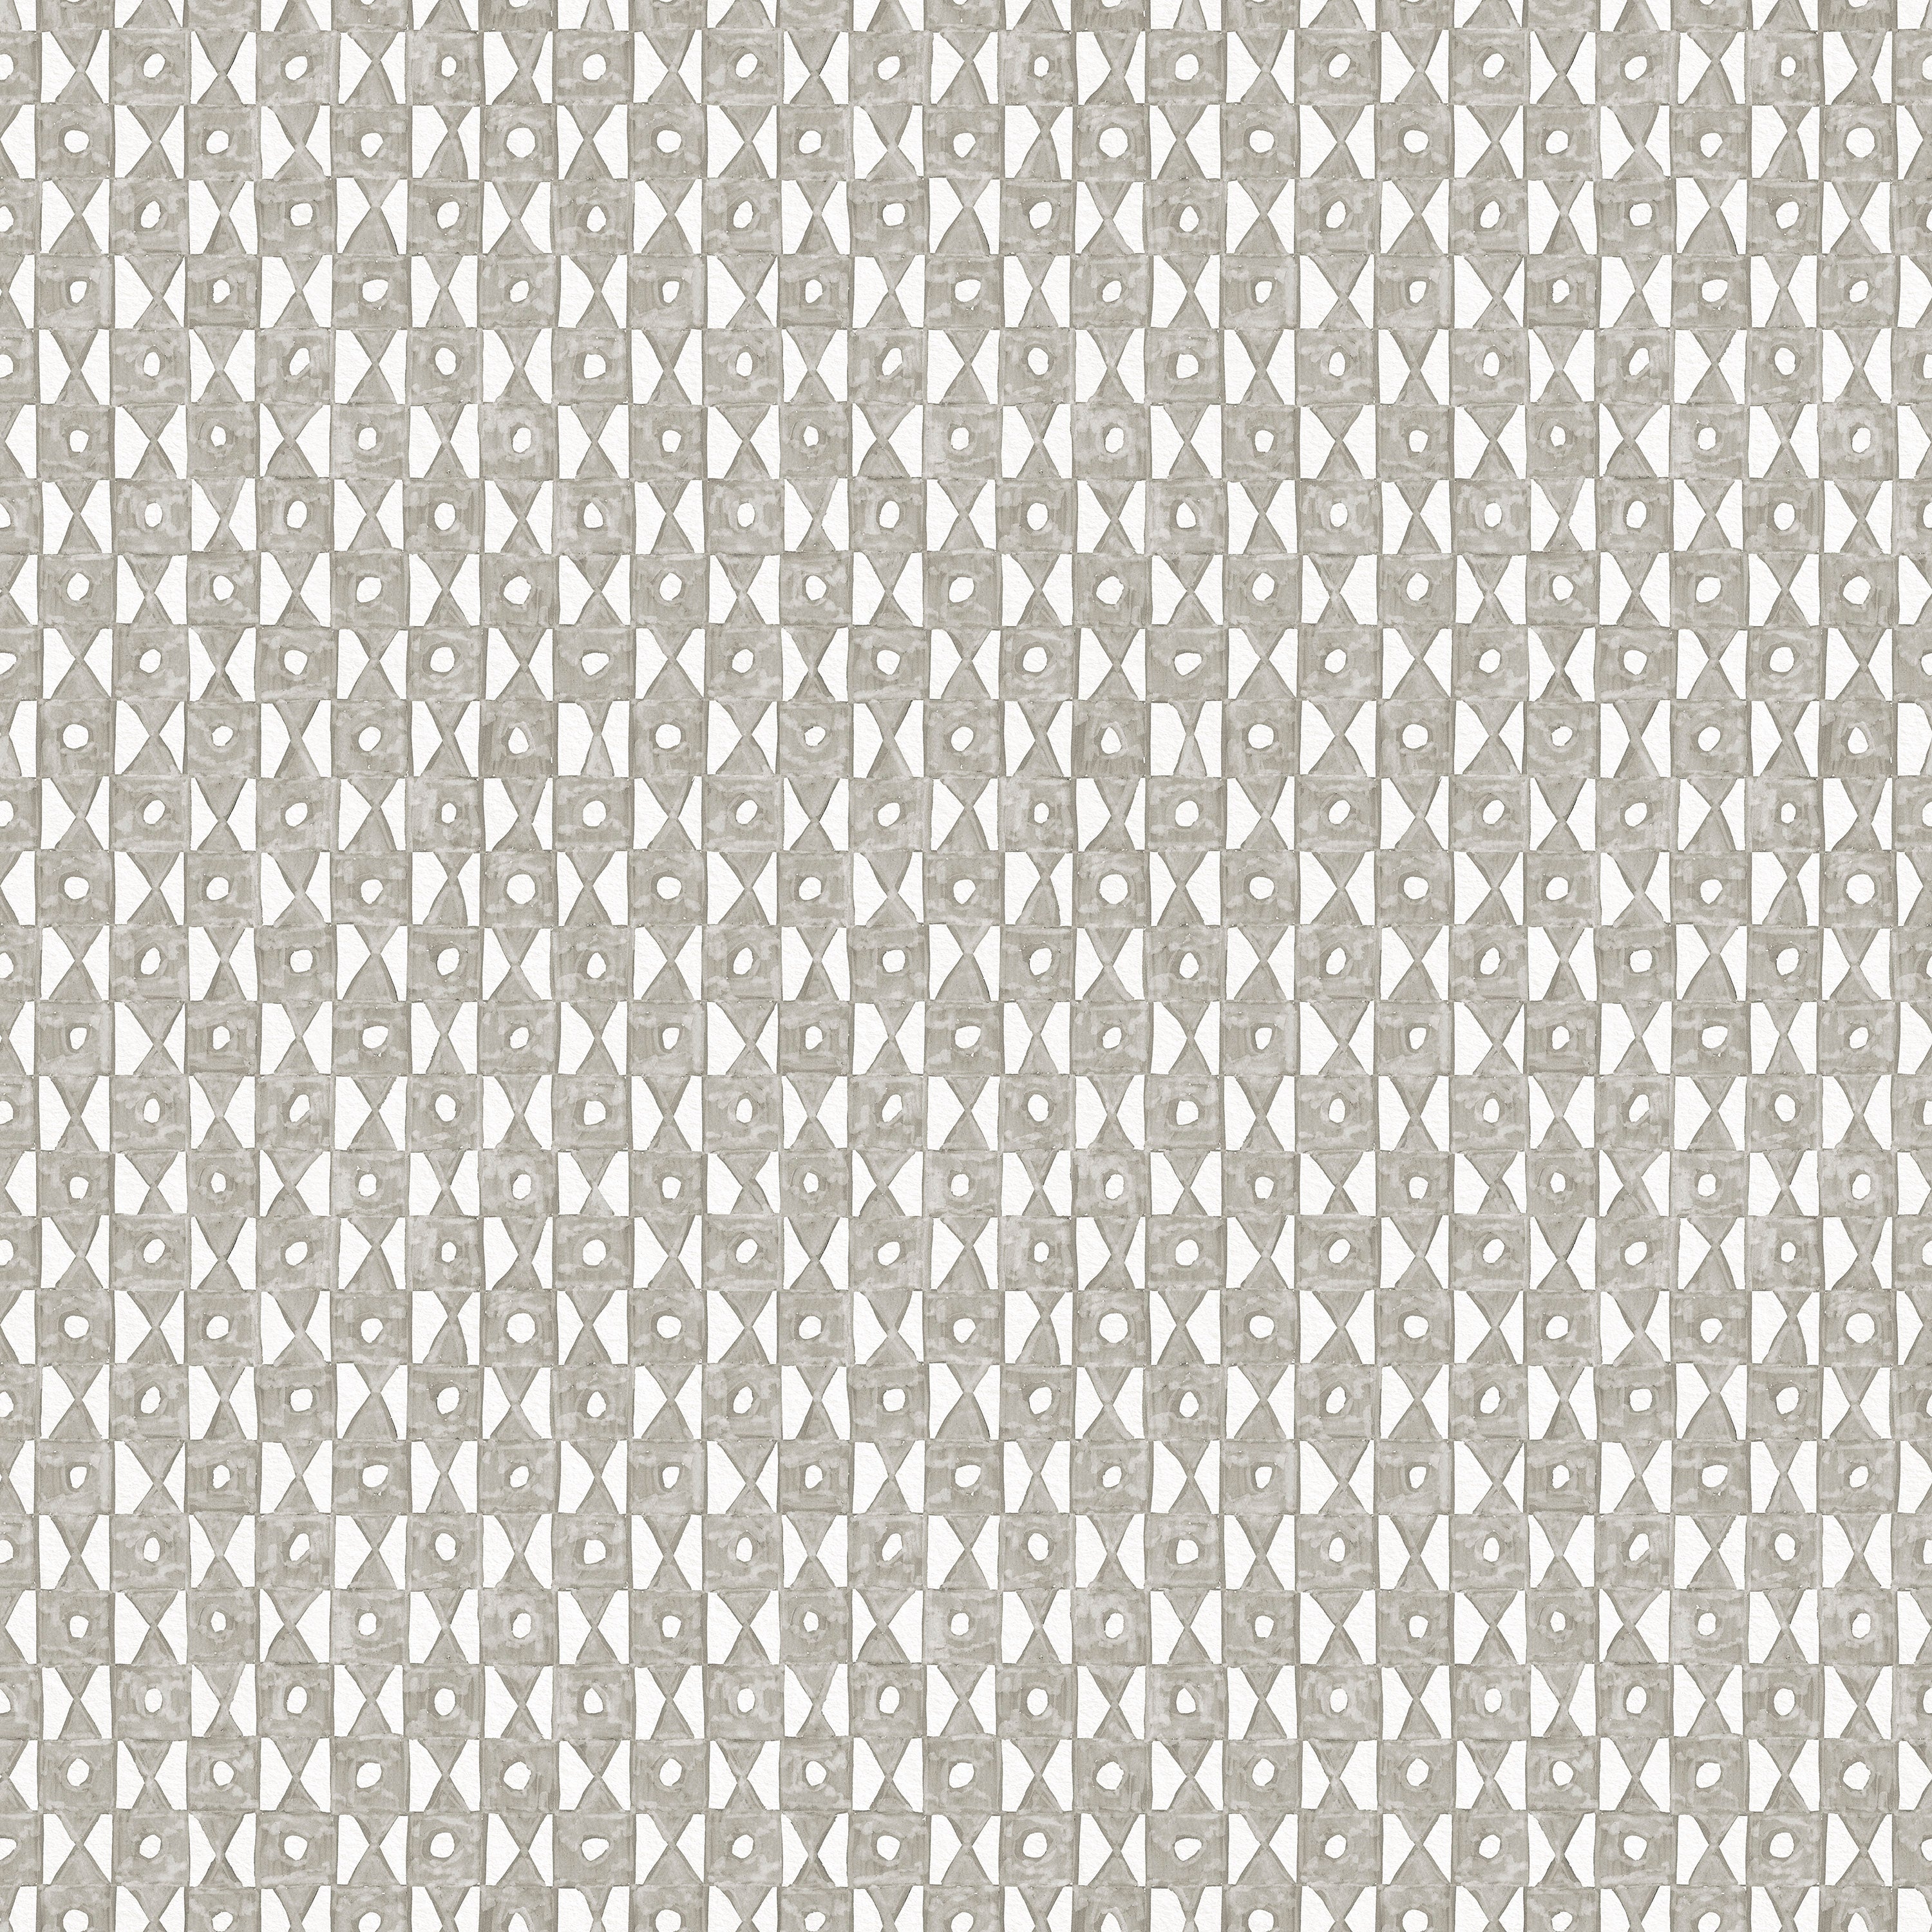 Detail of wallpaper in a geometric grid print in gray on a white field.